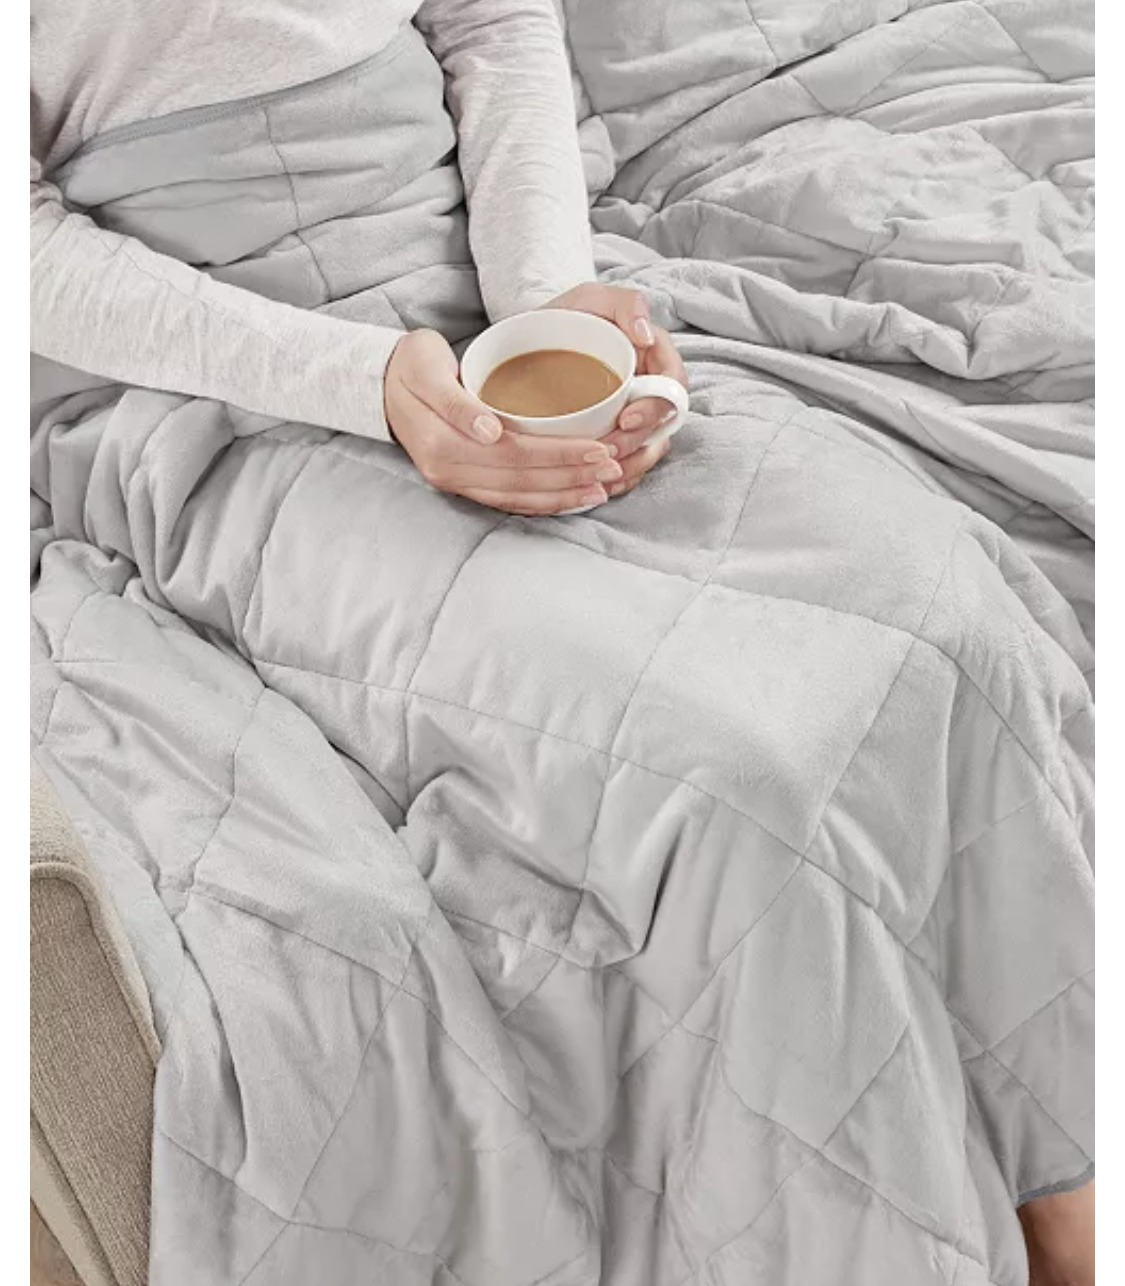 Weighted Blankets On Sale at Macy's | Free Tastes Good!